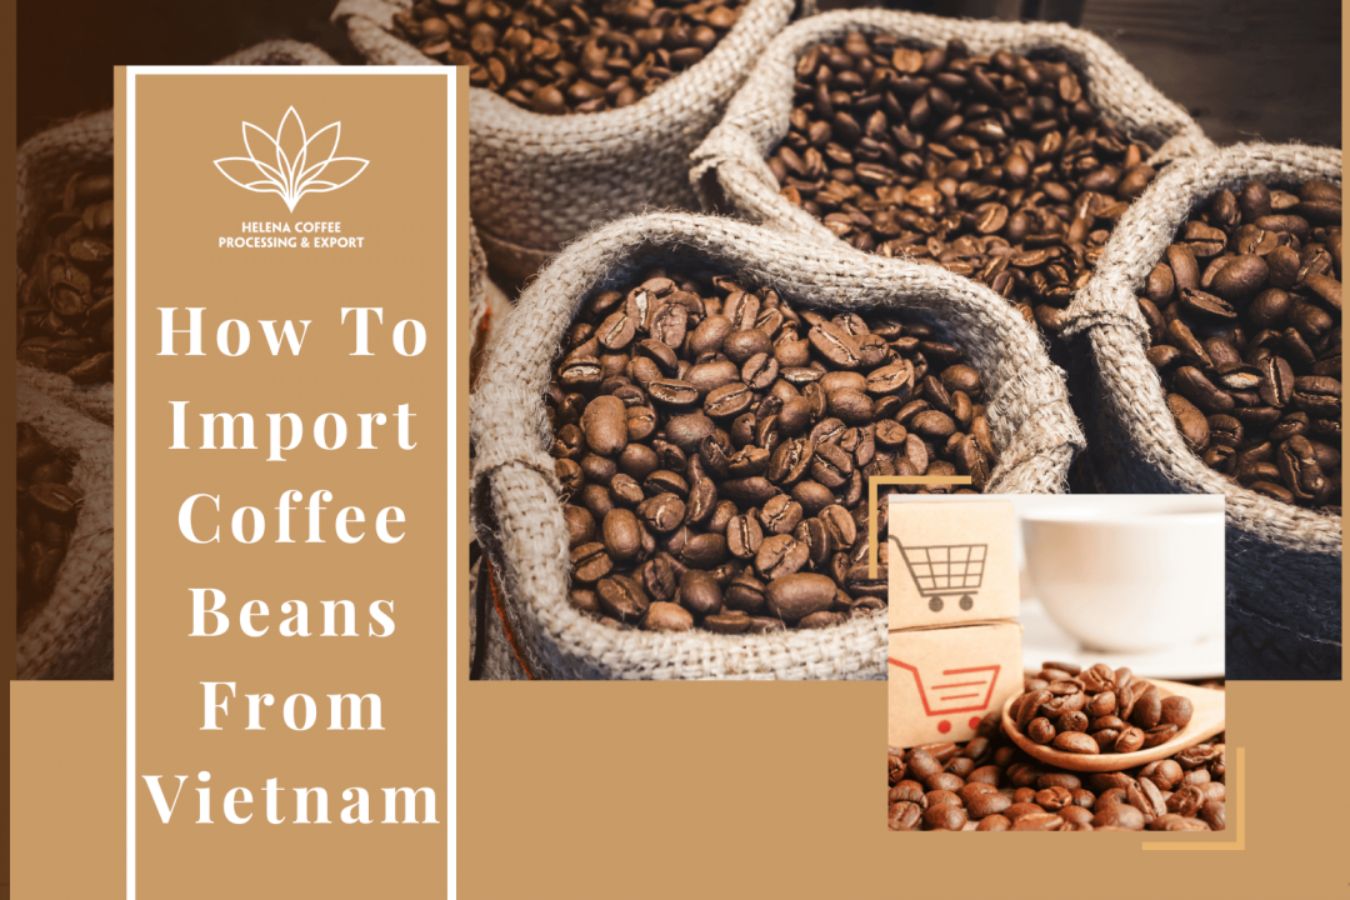 How To Import Coffee Beans From Vietnam